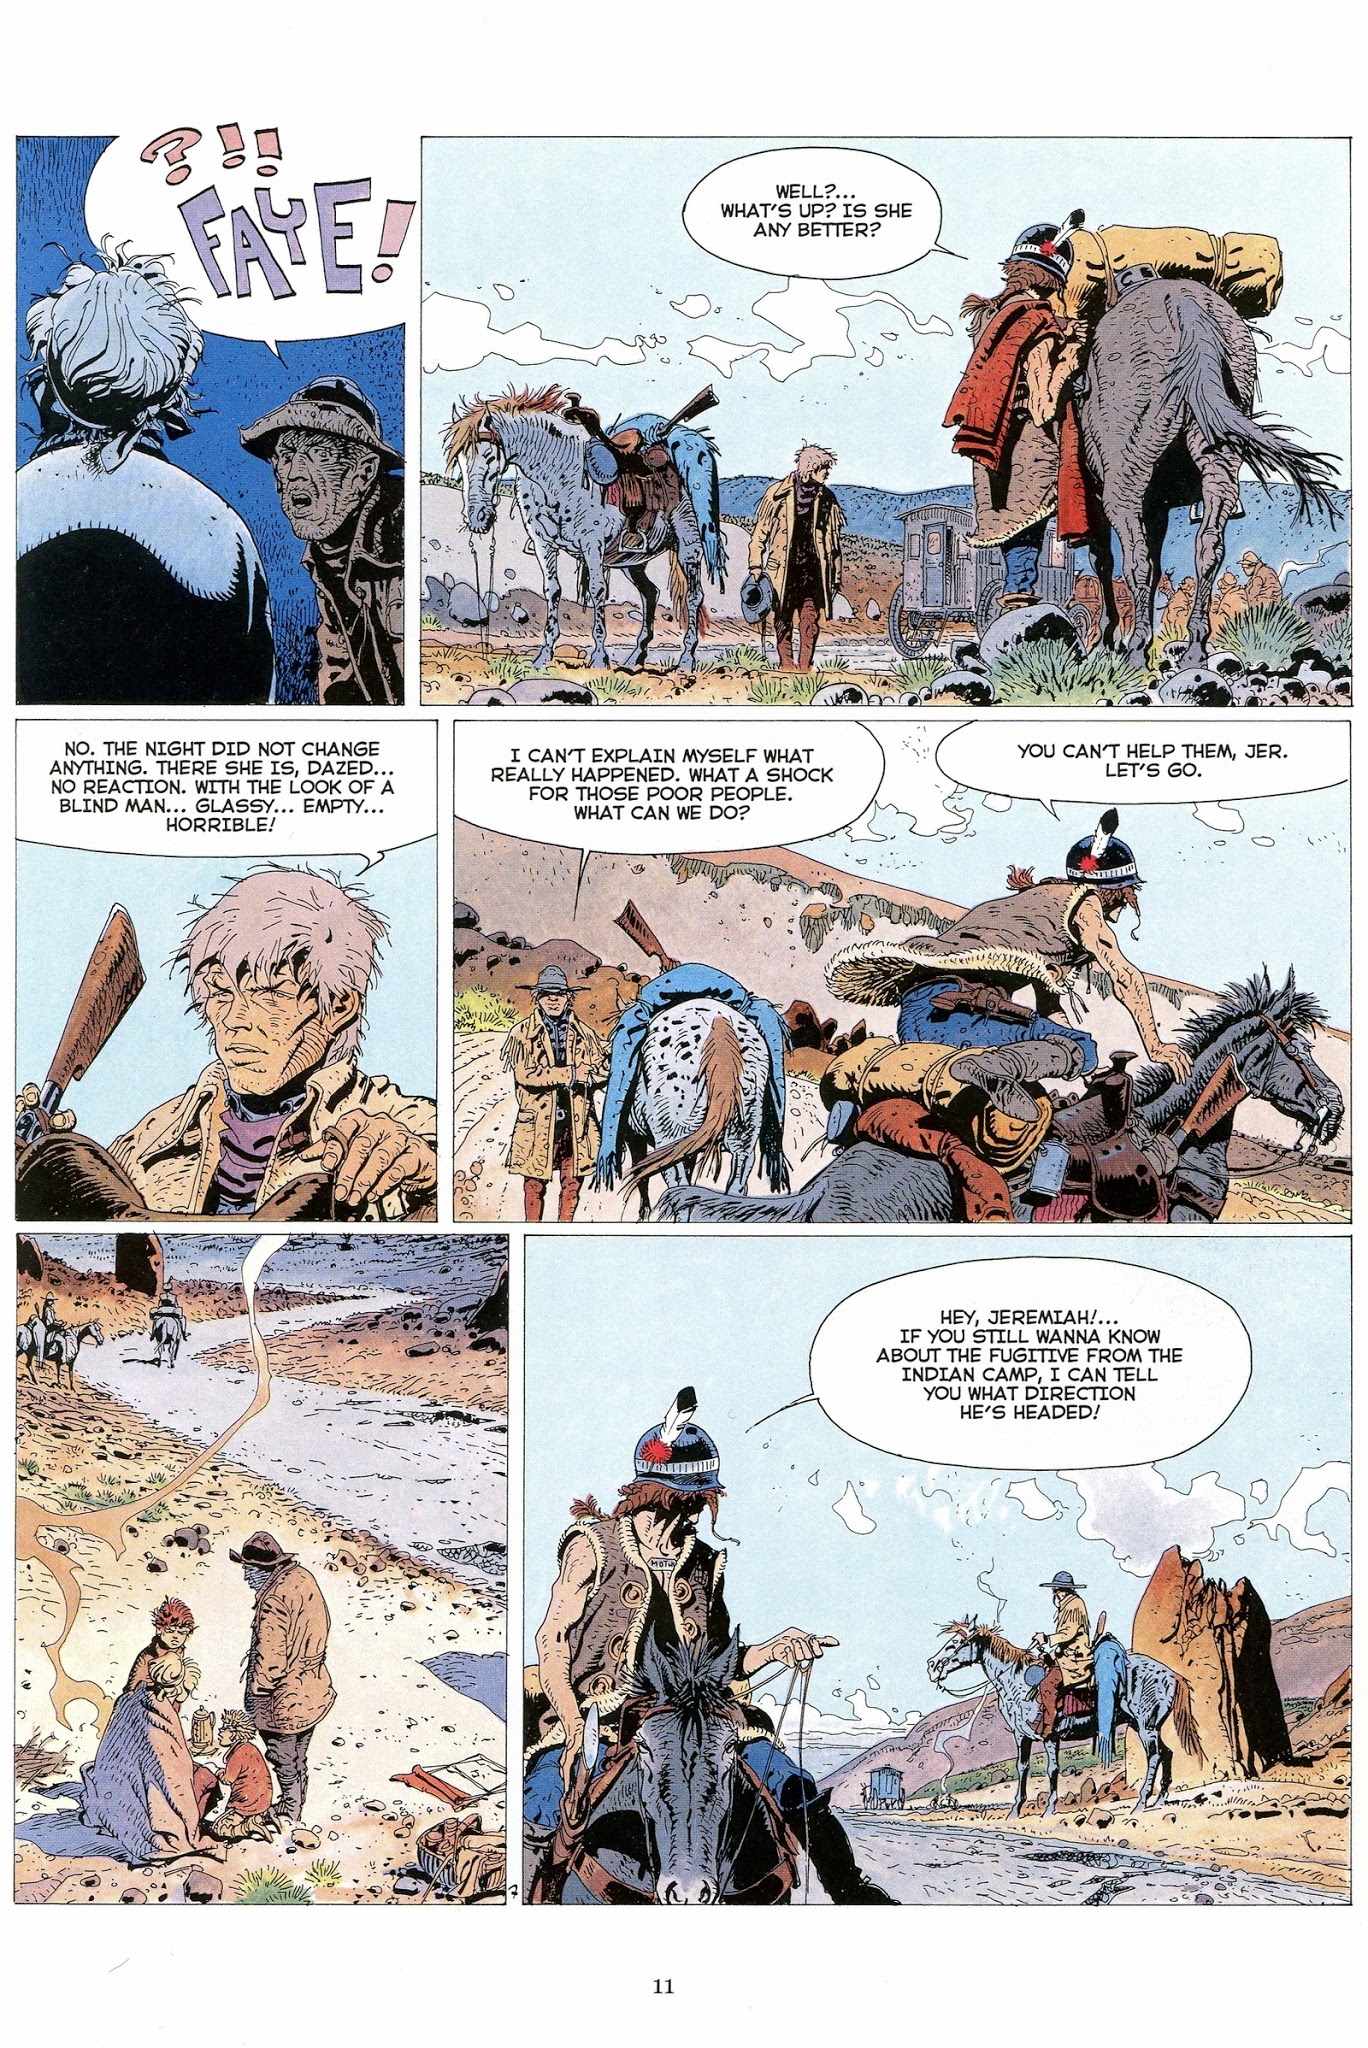 Read online Jeremiah by Hermann comic -  Issue # TPB 2 - 12